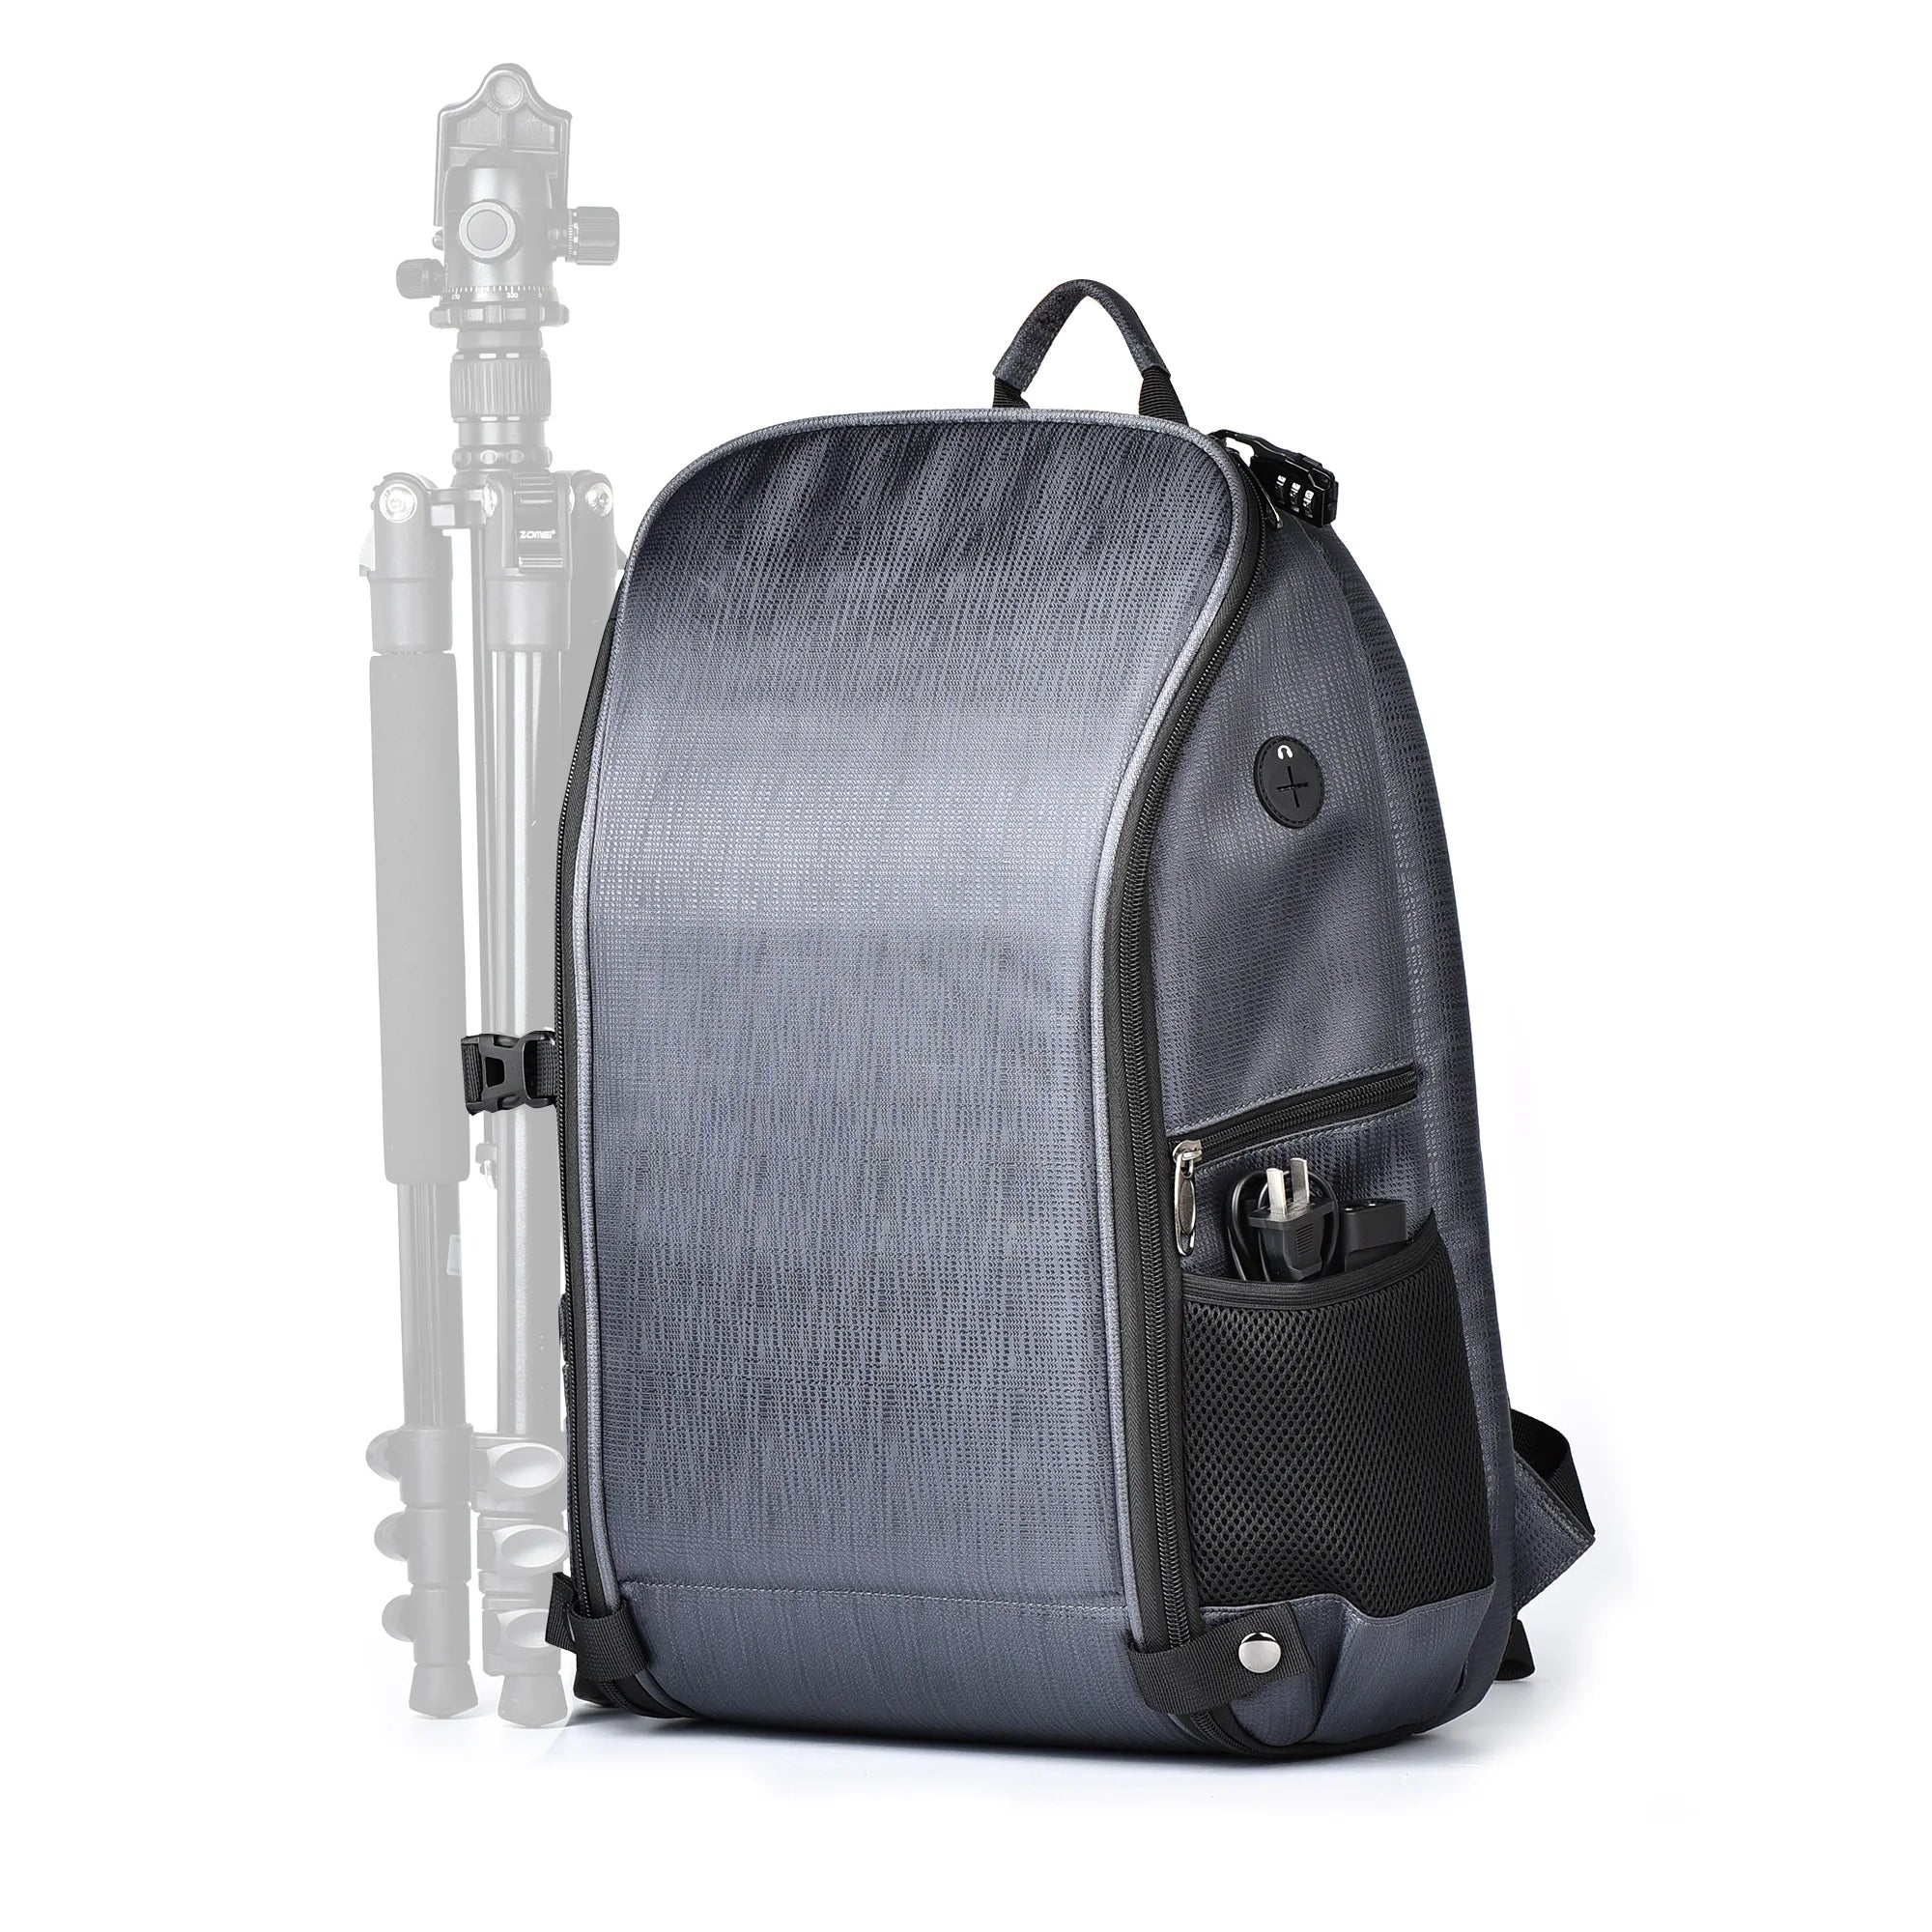 large capacity backpack, it can be storage DJI FPV COMBO Drone,